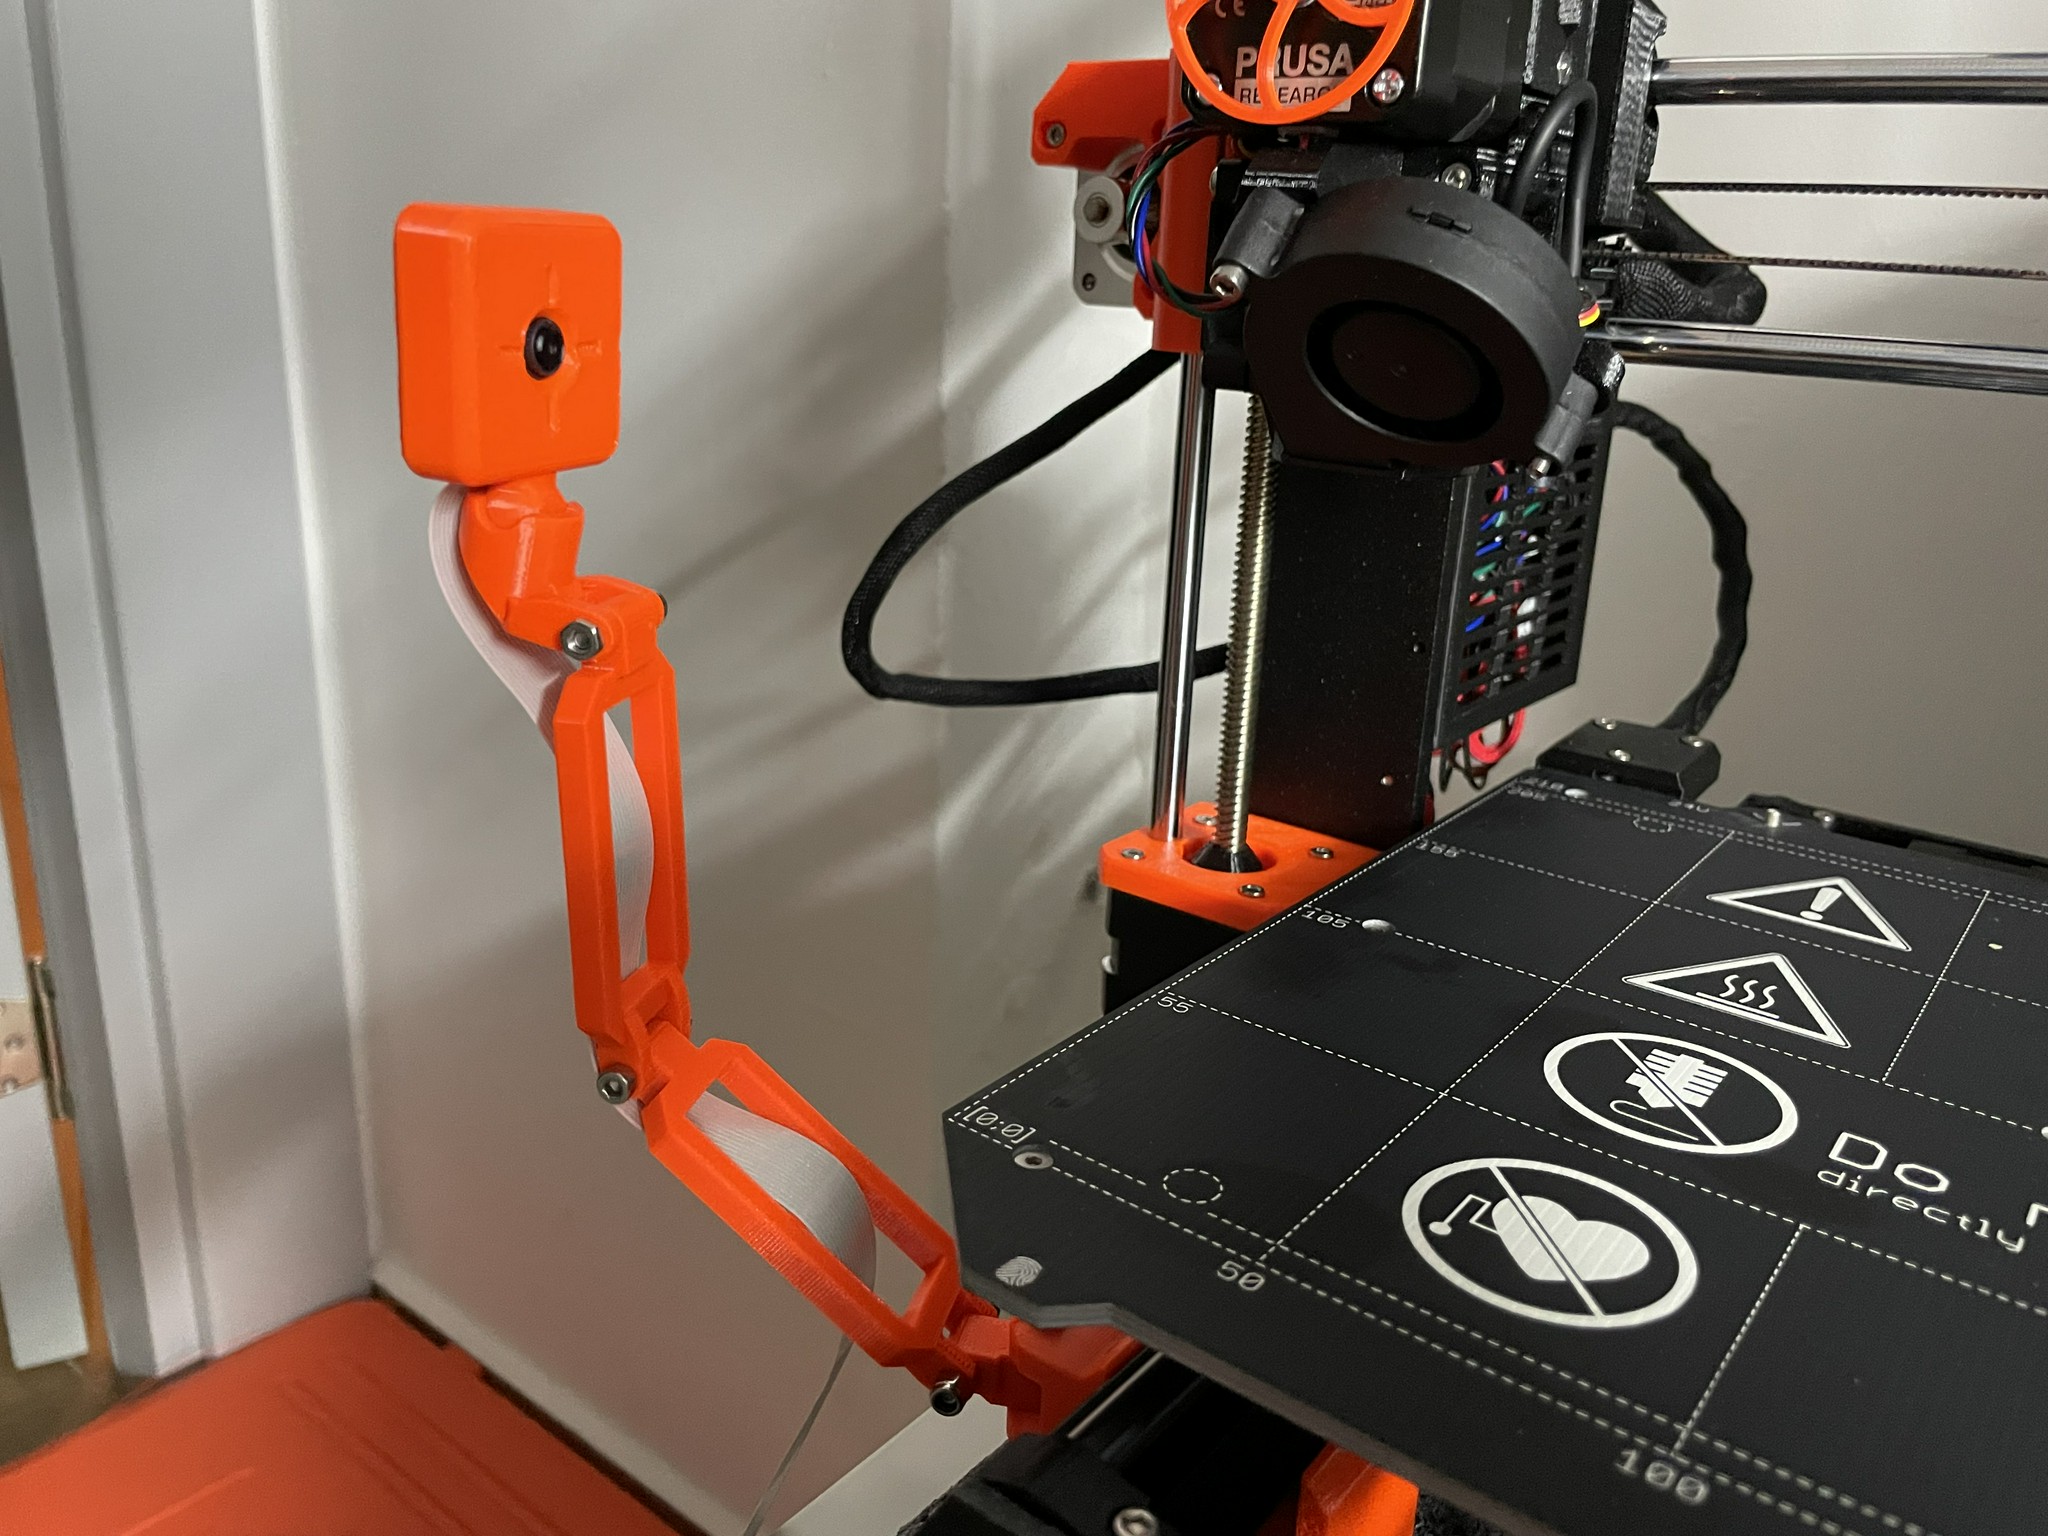 The Raspberry Pi camera attached to the 3D printer